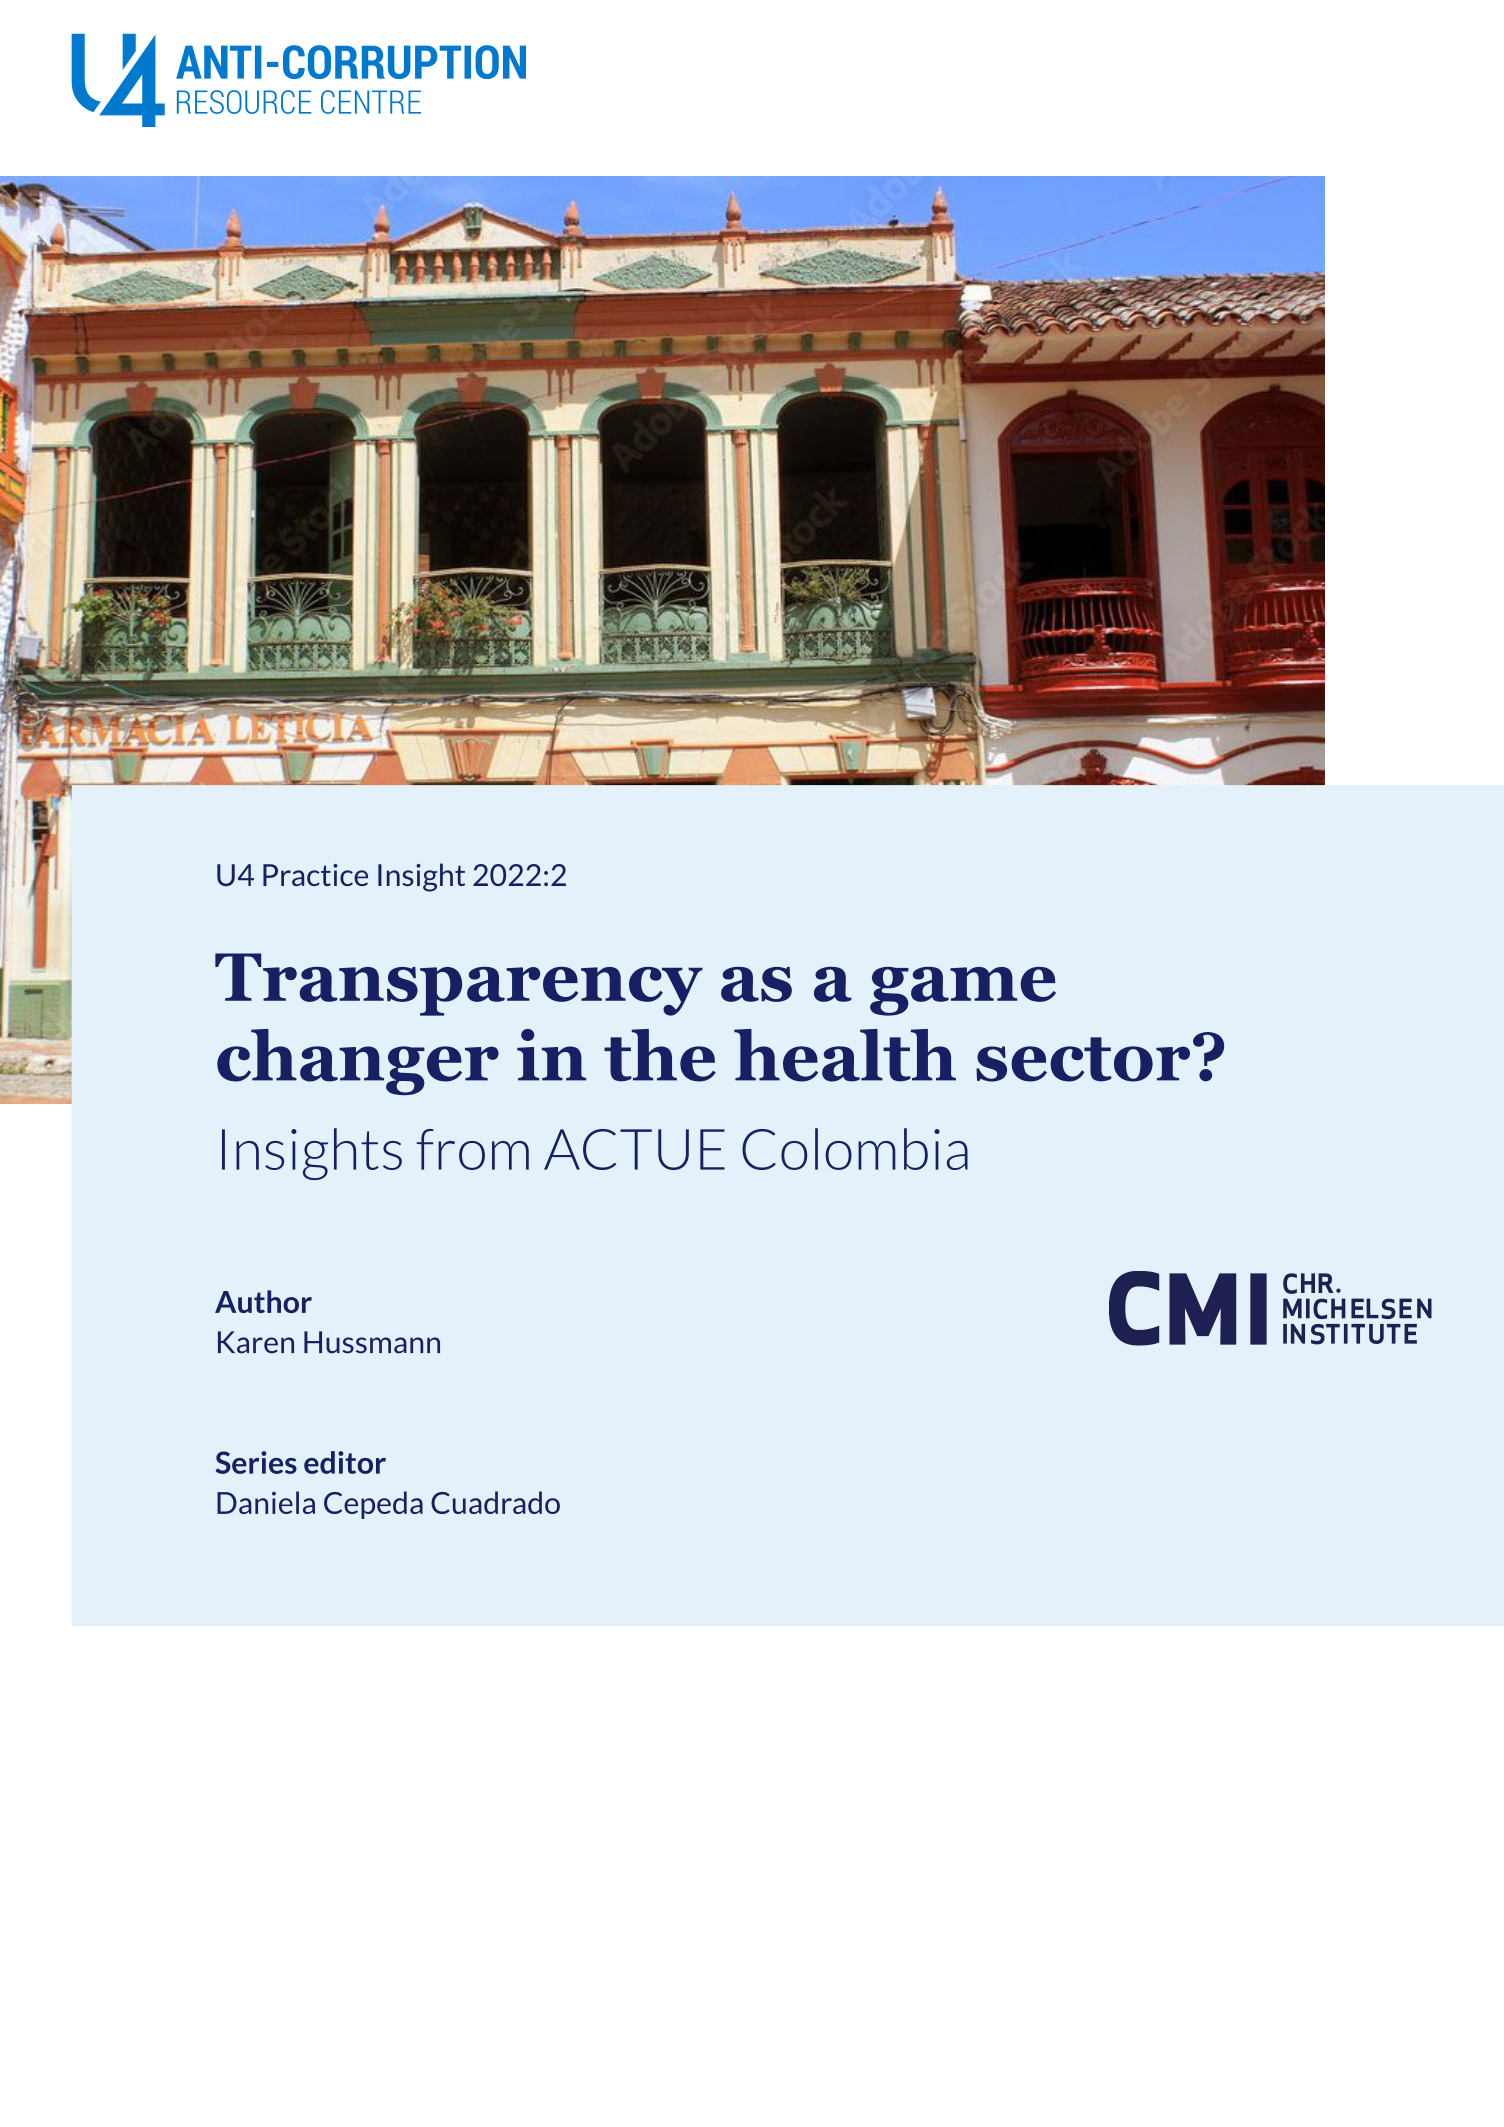 Transparency as a game changer in the health sector?